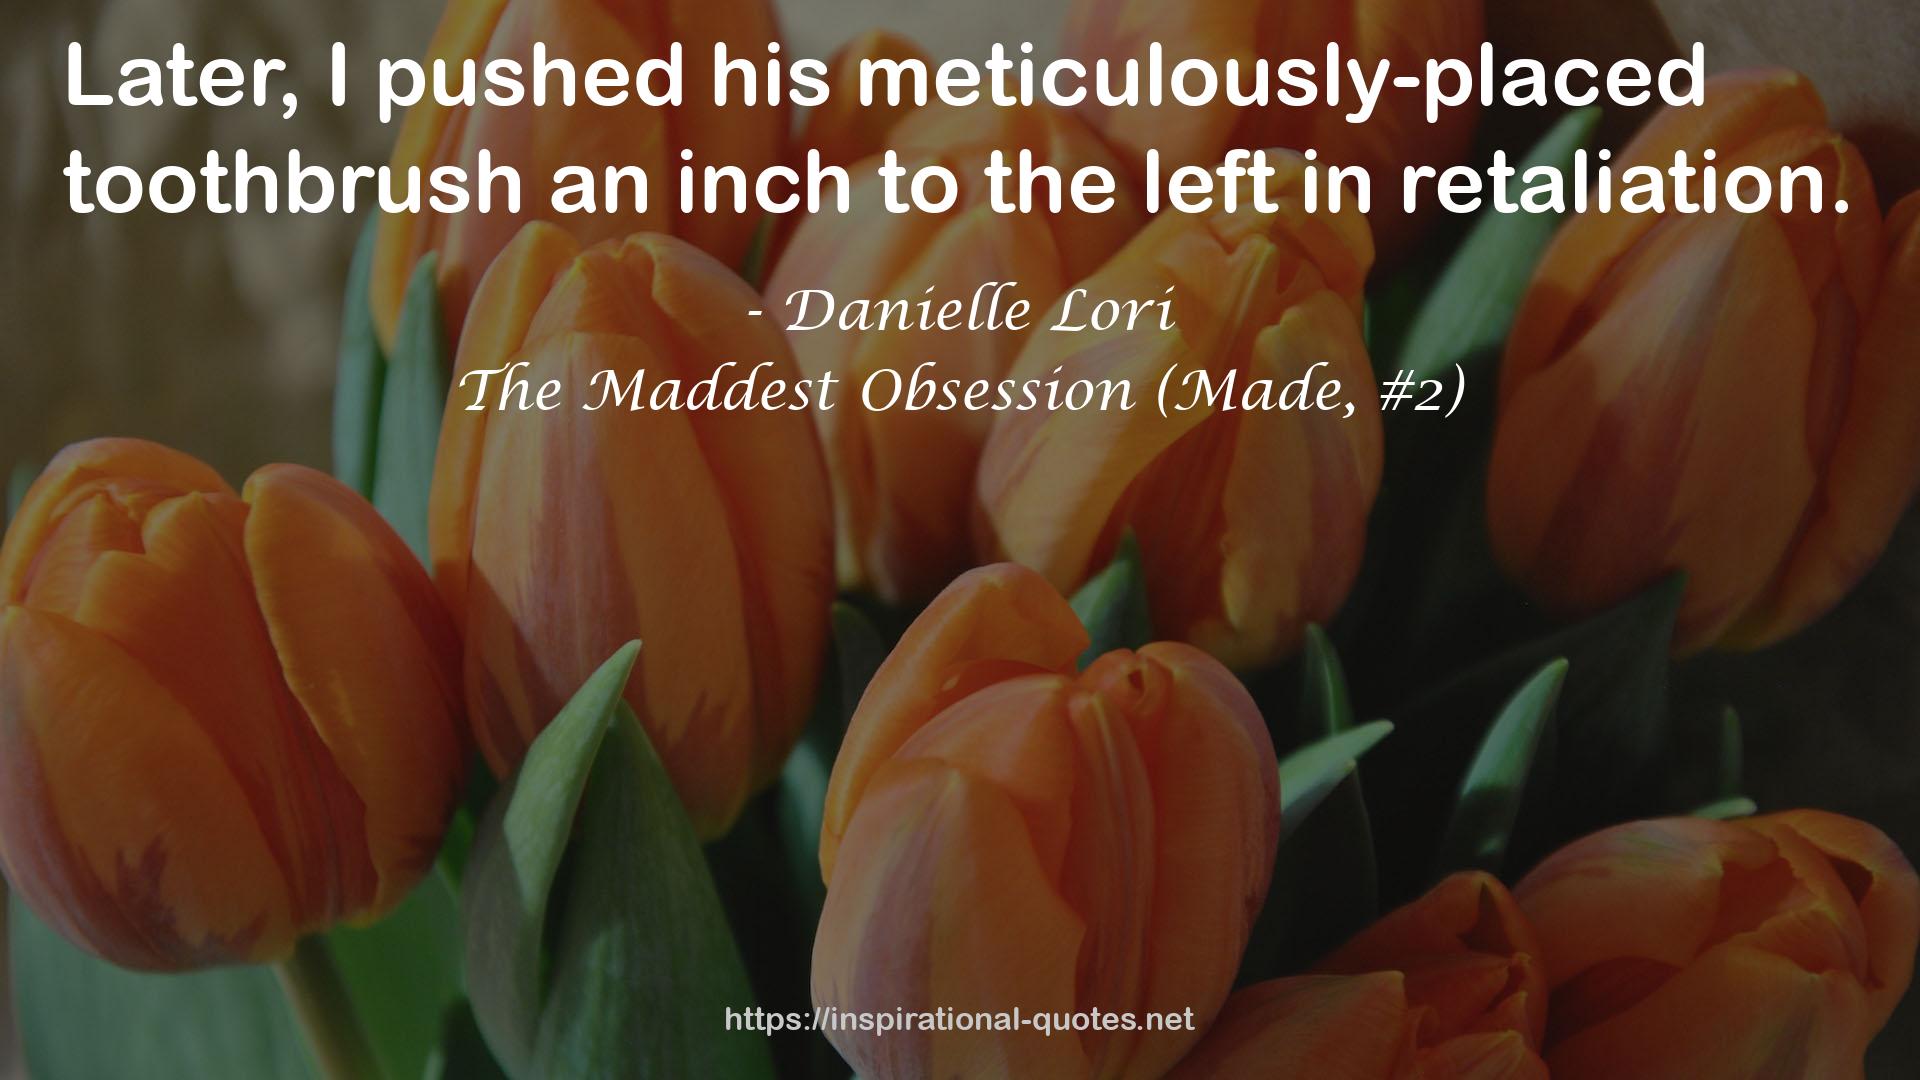 The Maddest Obsession (Made, #2) QUOTES